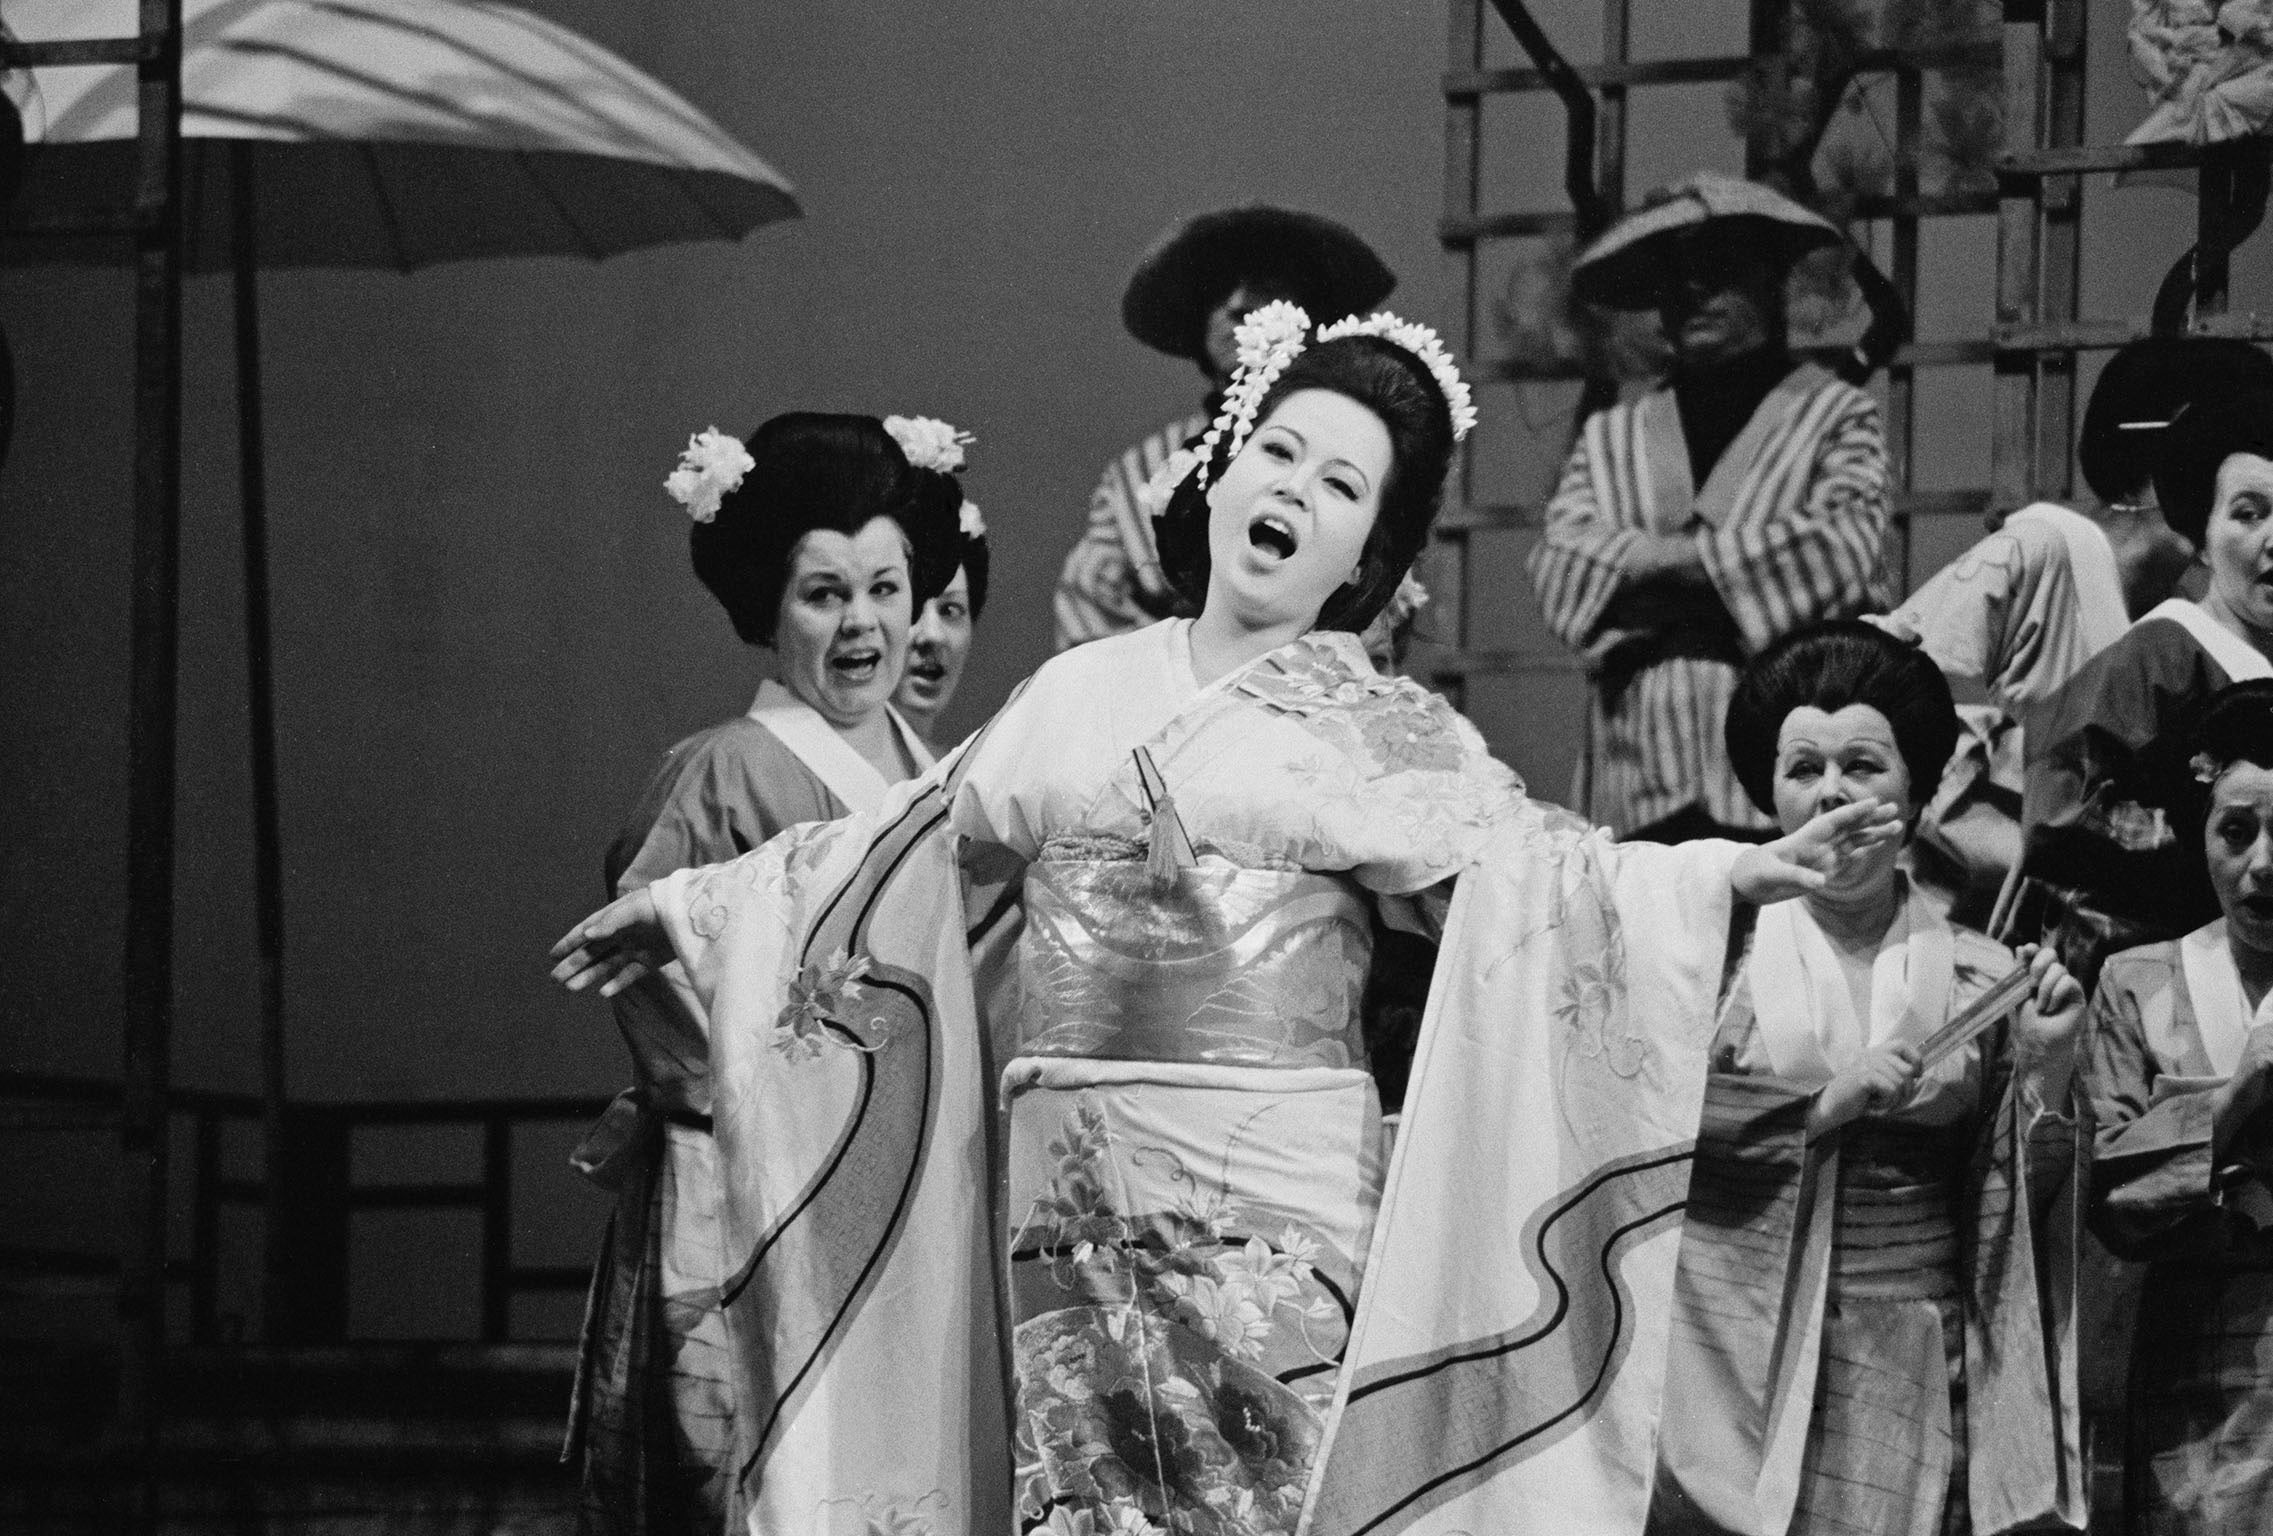 Yasuko Hayashi in the title role of Puccini’s ‘Madama Butterfly’ at the Royal Opera House in London, 1975. The work premiered in 1904